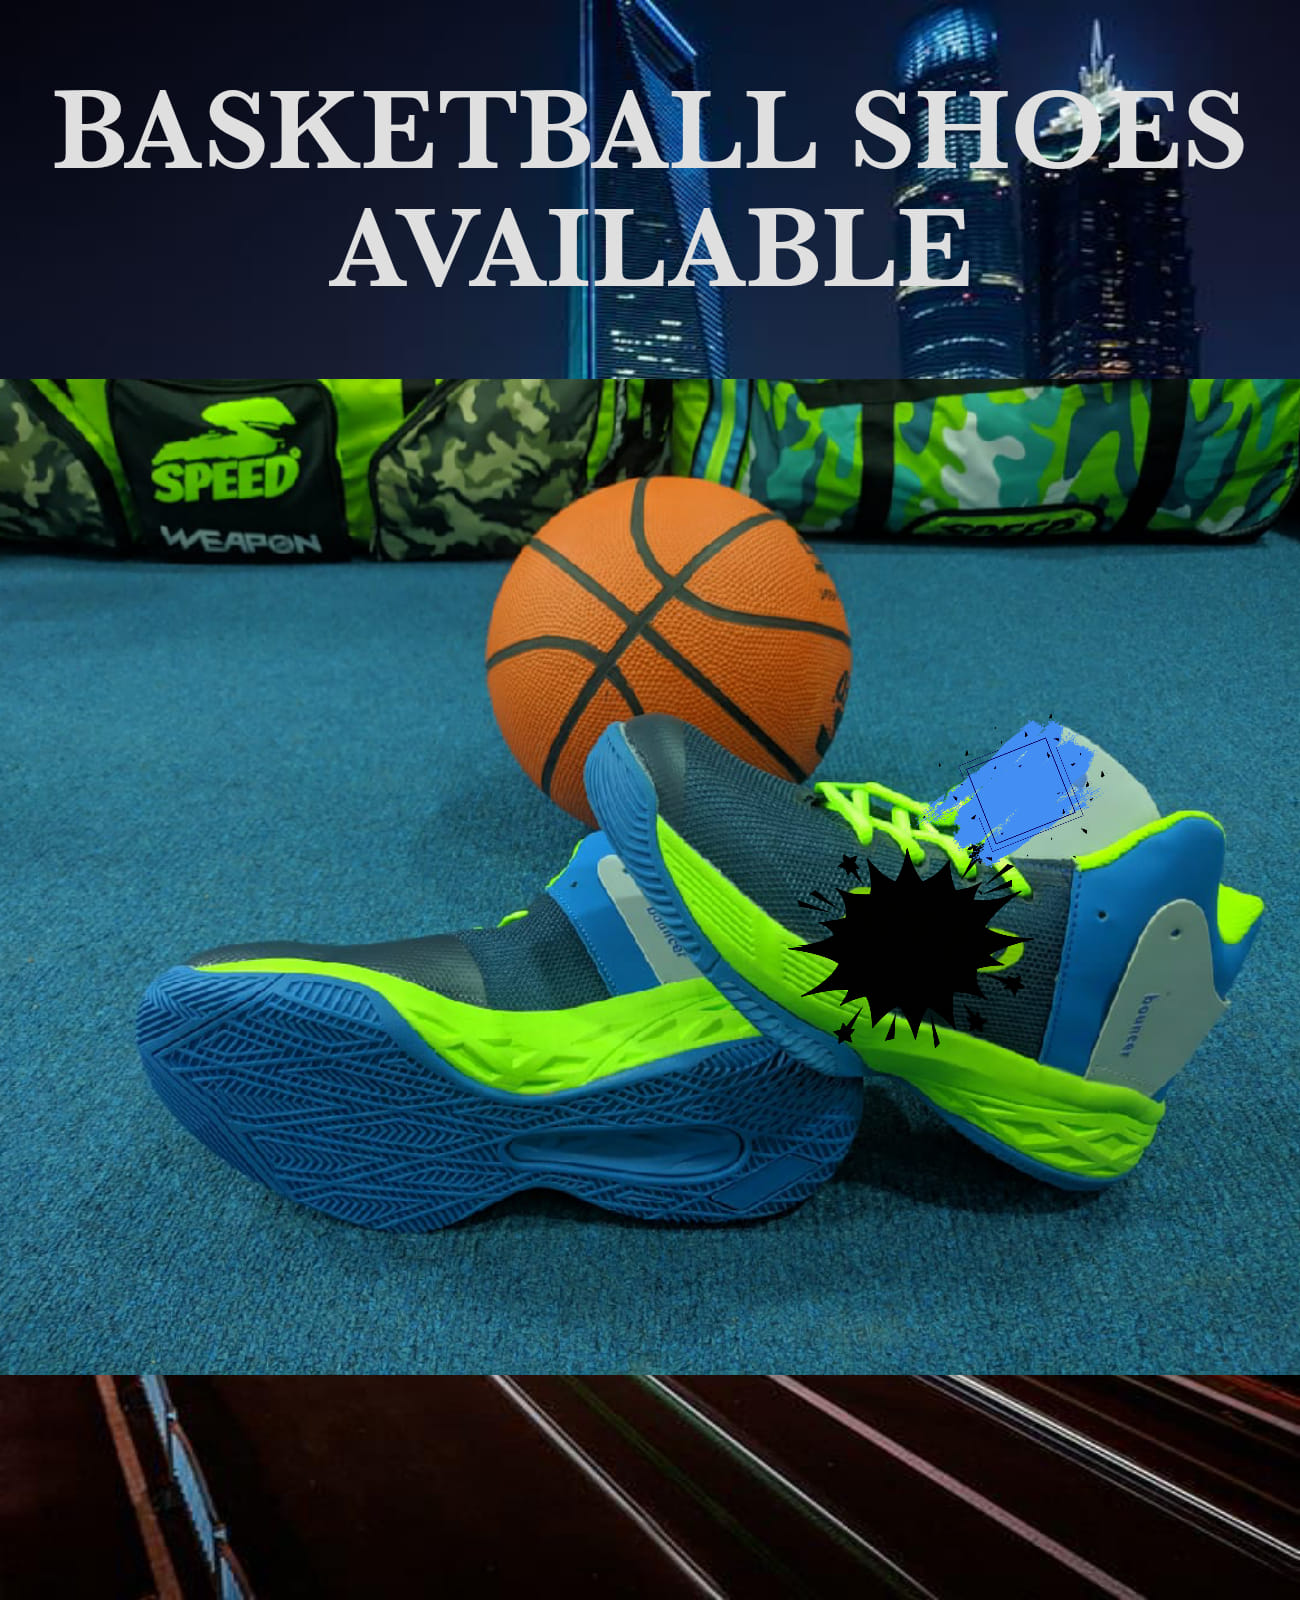 Product Basketball shoes